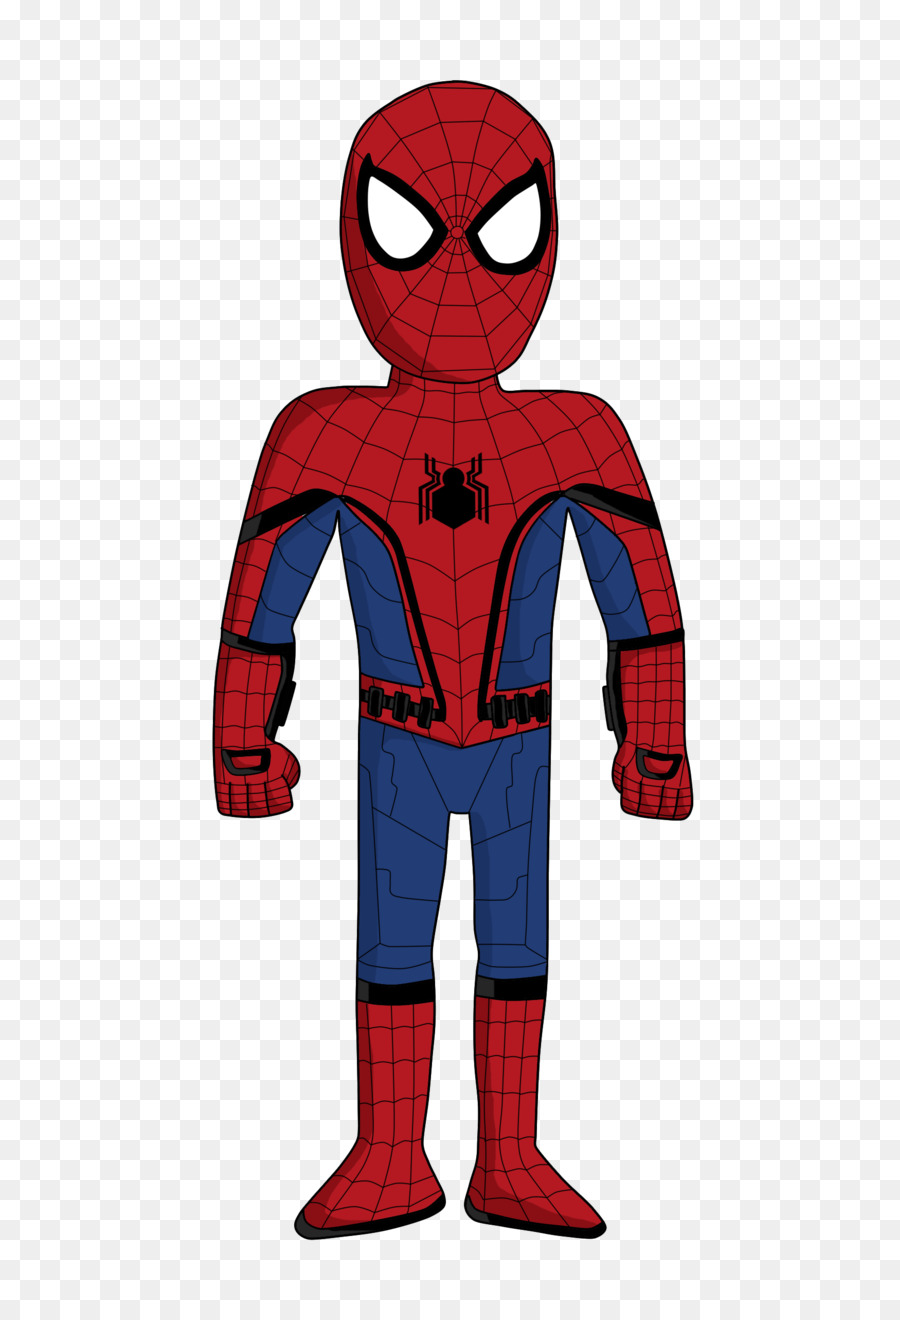 Spiderman Homecoming Clipart. 